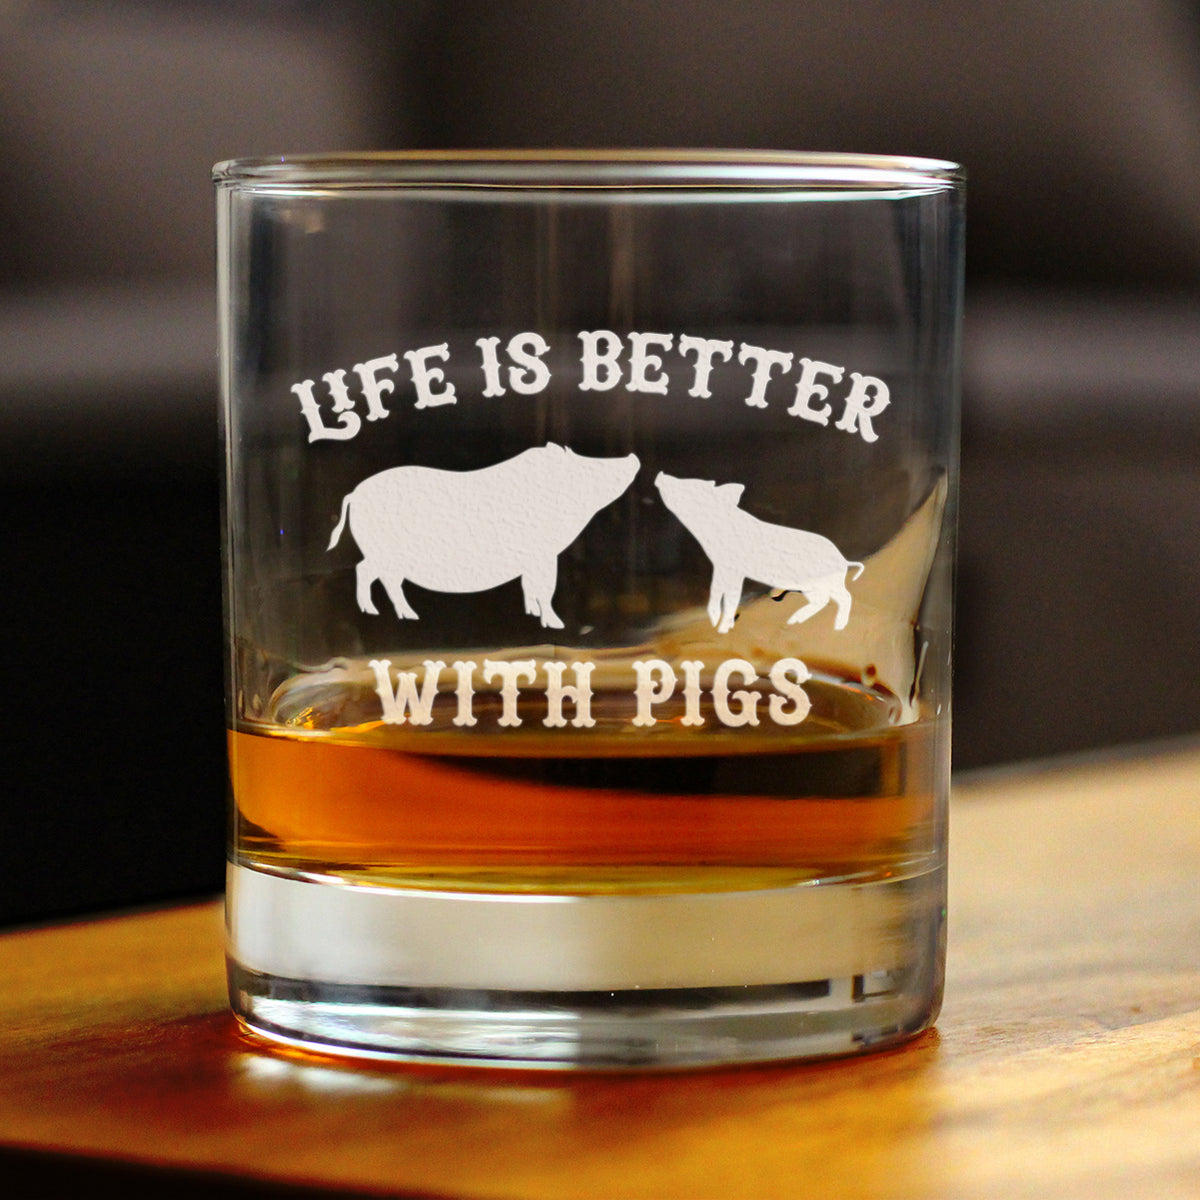 Life Is Better With Pigs - Whiskey Rocks Glass Gifts - Funny Pig Gifts and Decor for Men &amp; Women - 10.25 Oz Glasses